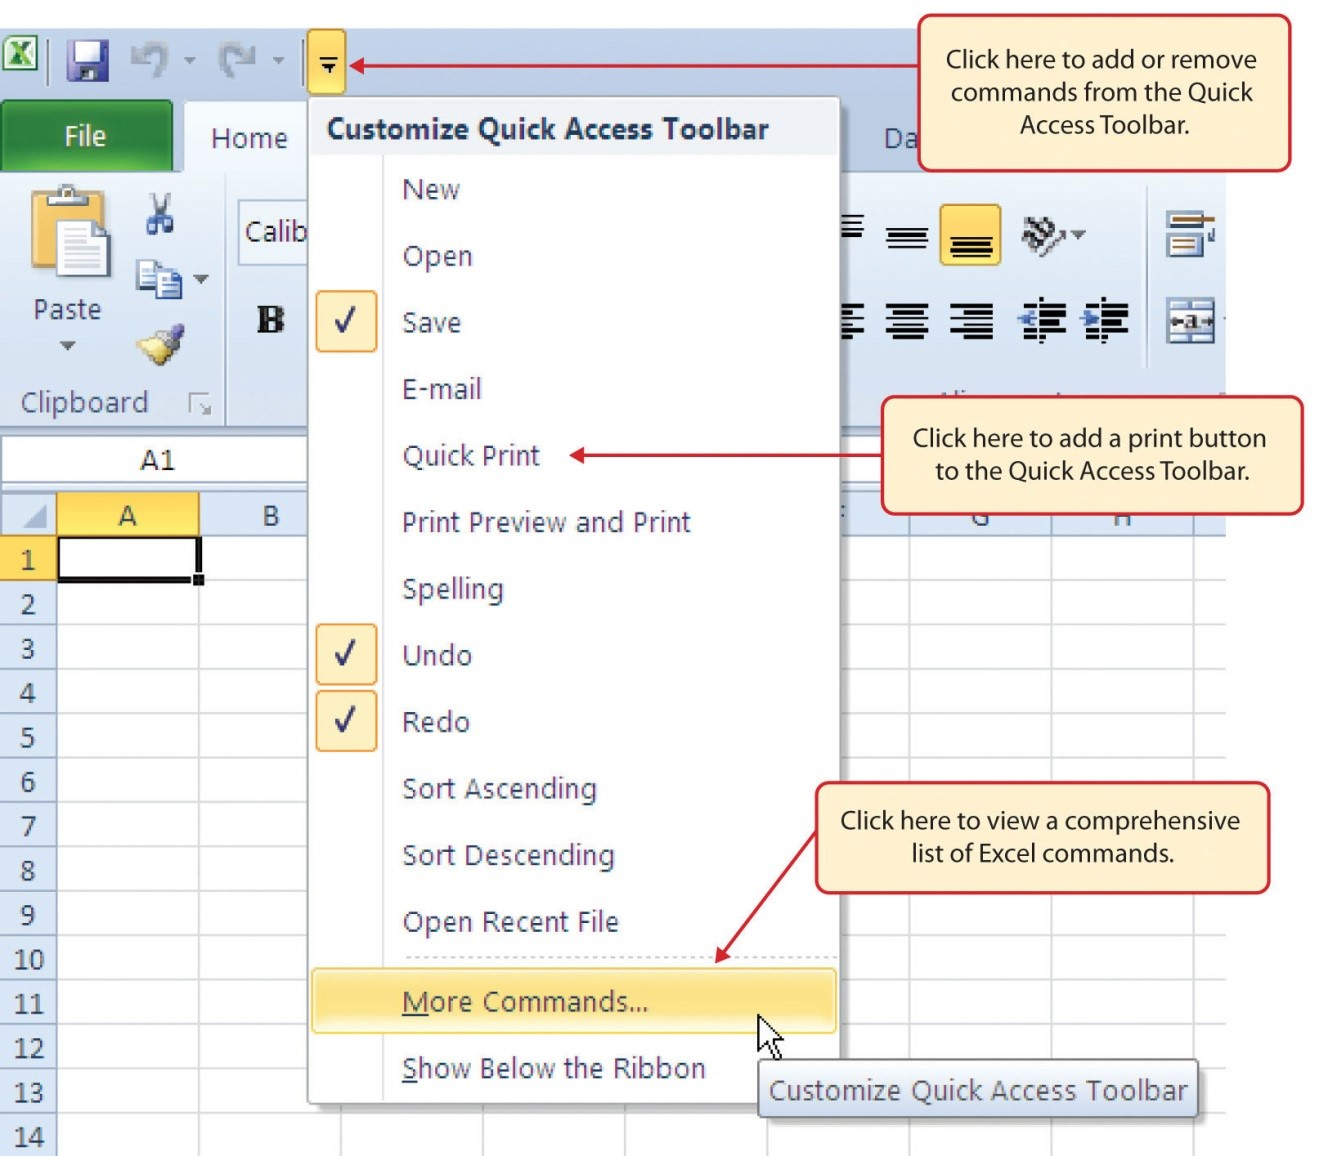 Customize Quick Access Toolbar with frequently used commands. Open Quick Access Toolbar via keyboard: Alt, F, T, arrow down. Via Keyboard to open Quick Access Toolbar: Alt, F, T, arrow down.